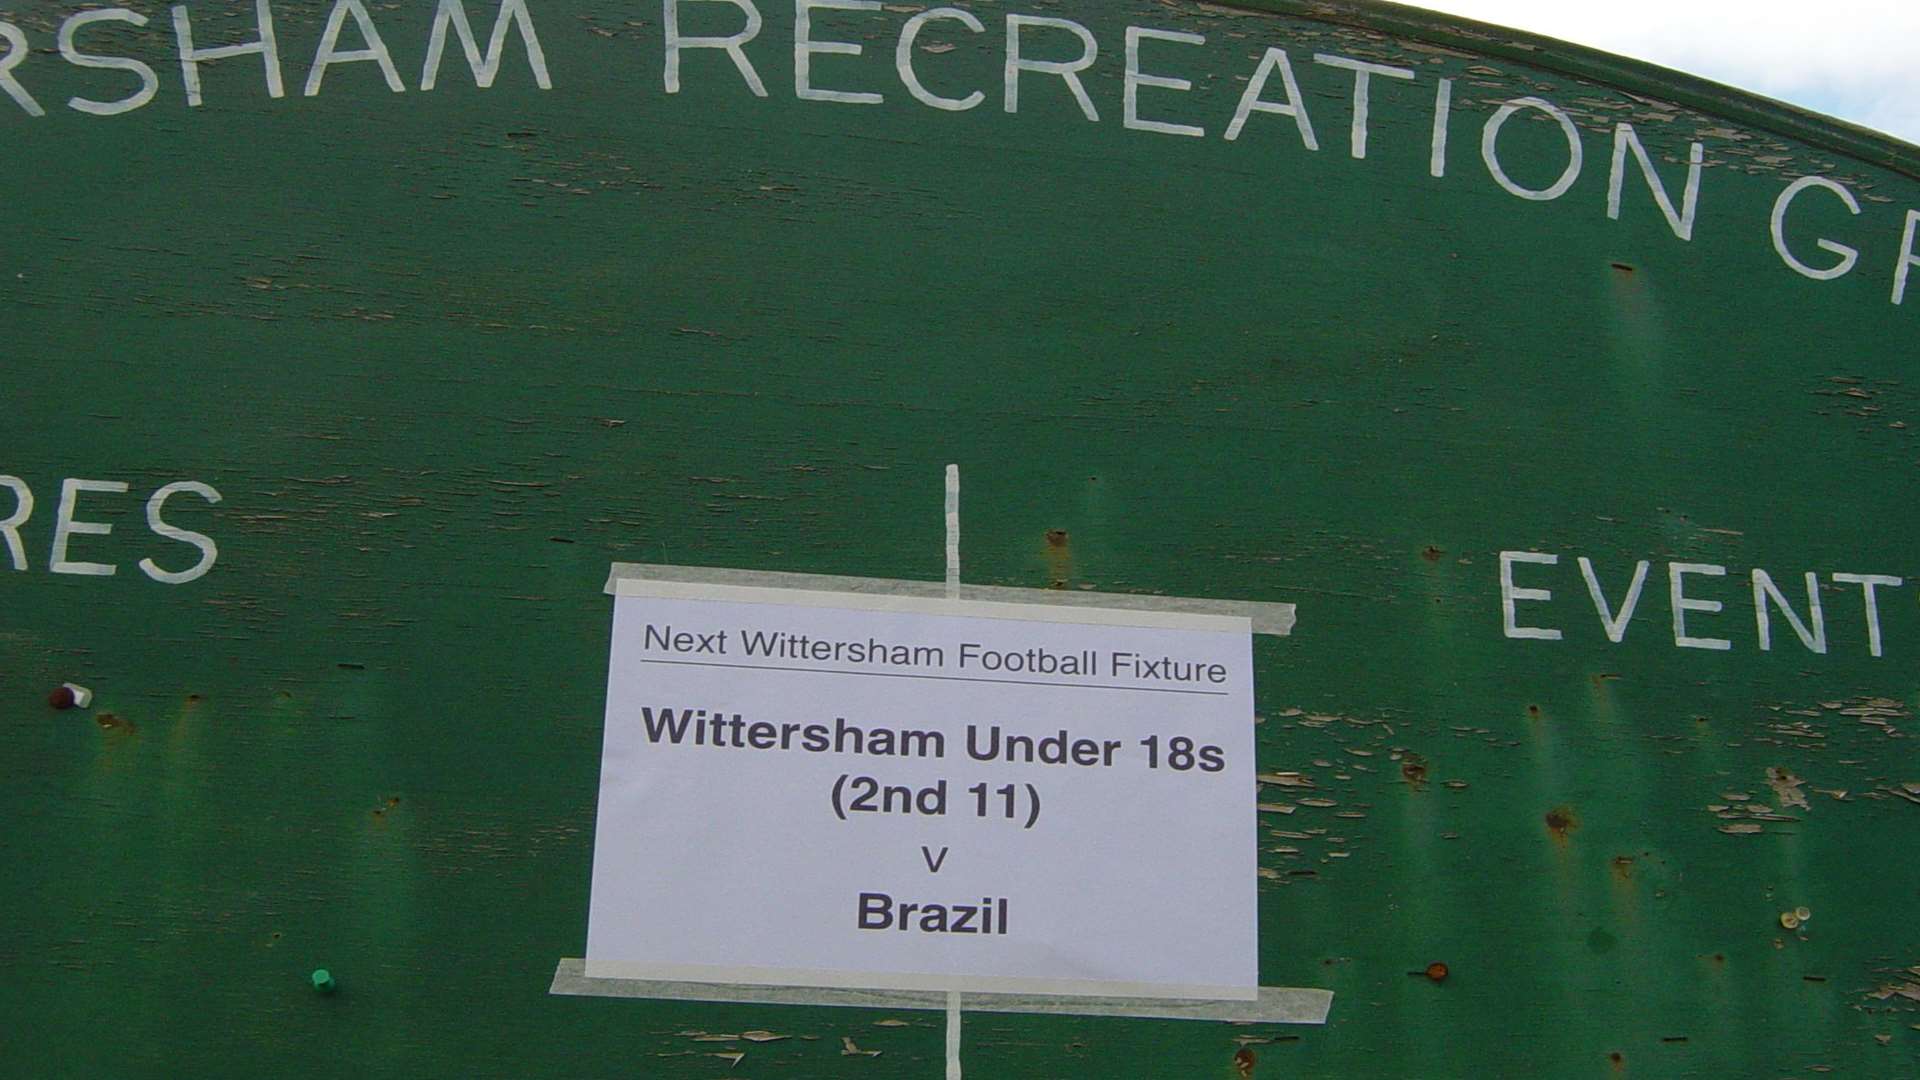 The weekend's Wittersham FC match is set to be a crowd-pleaser